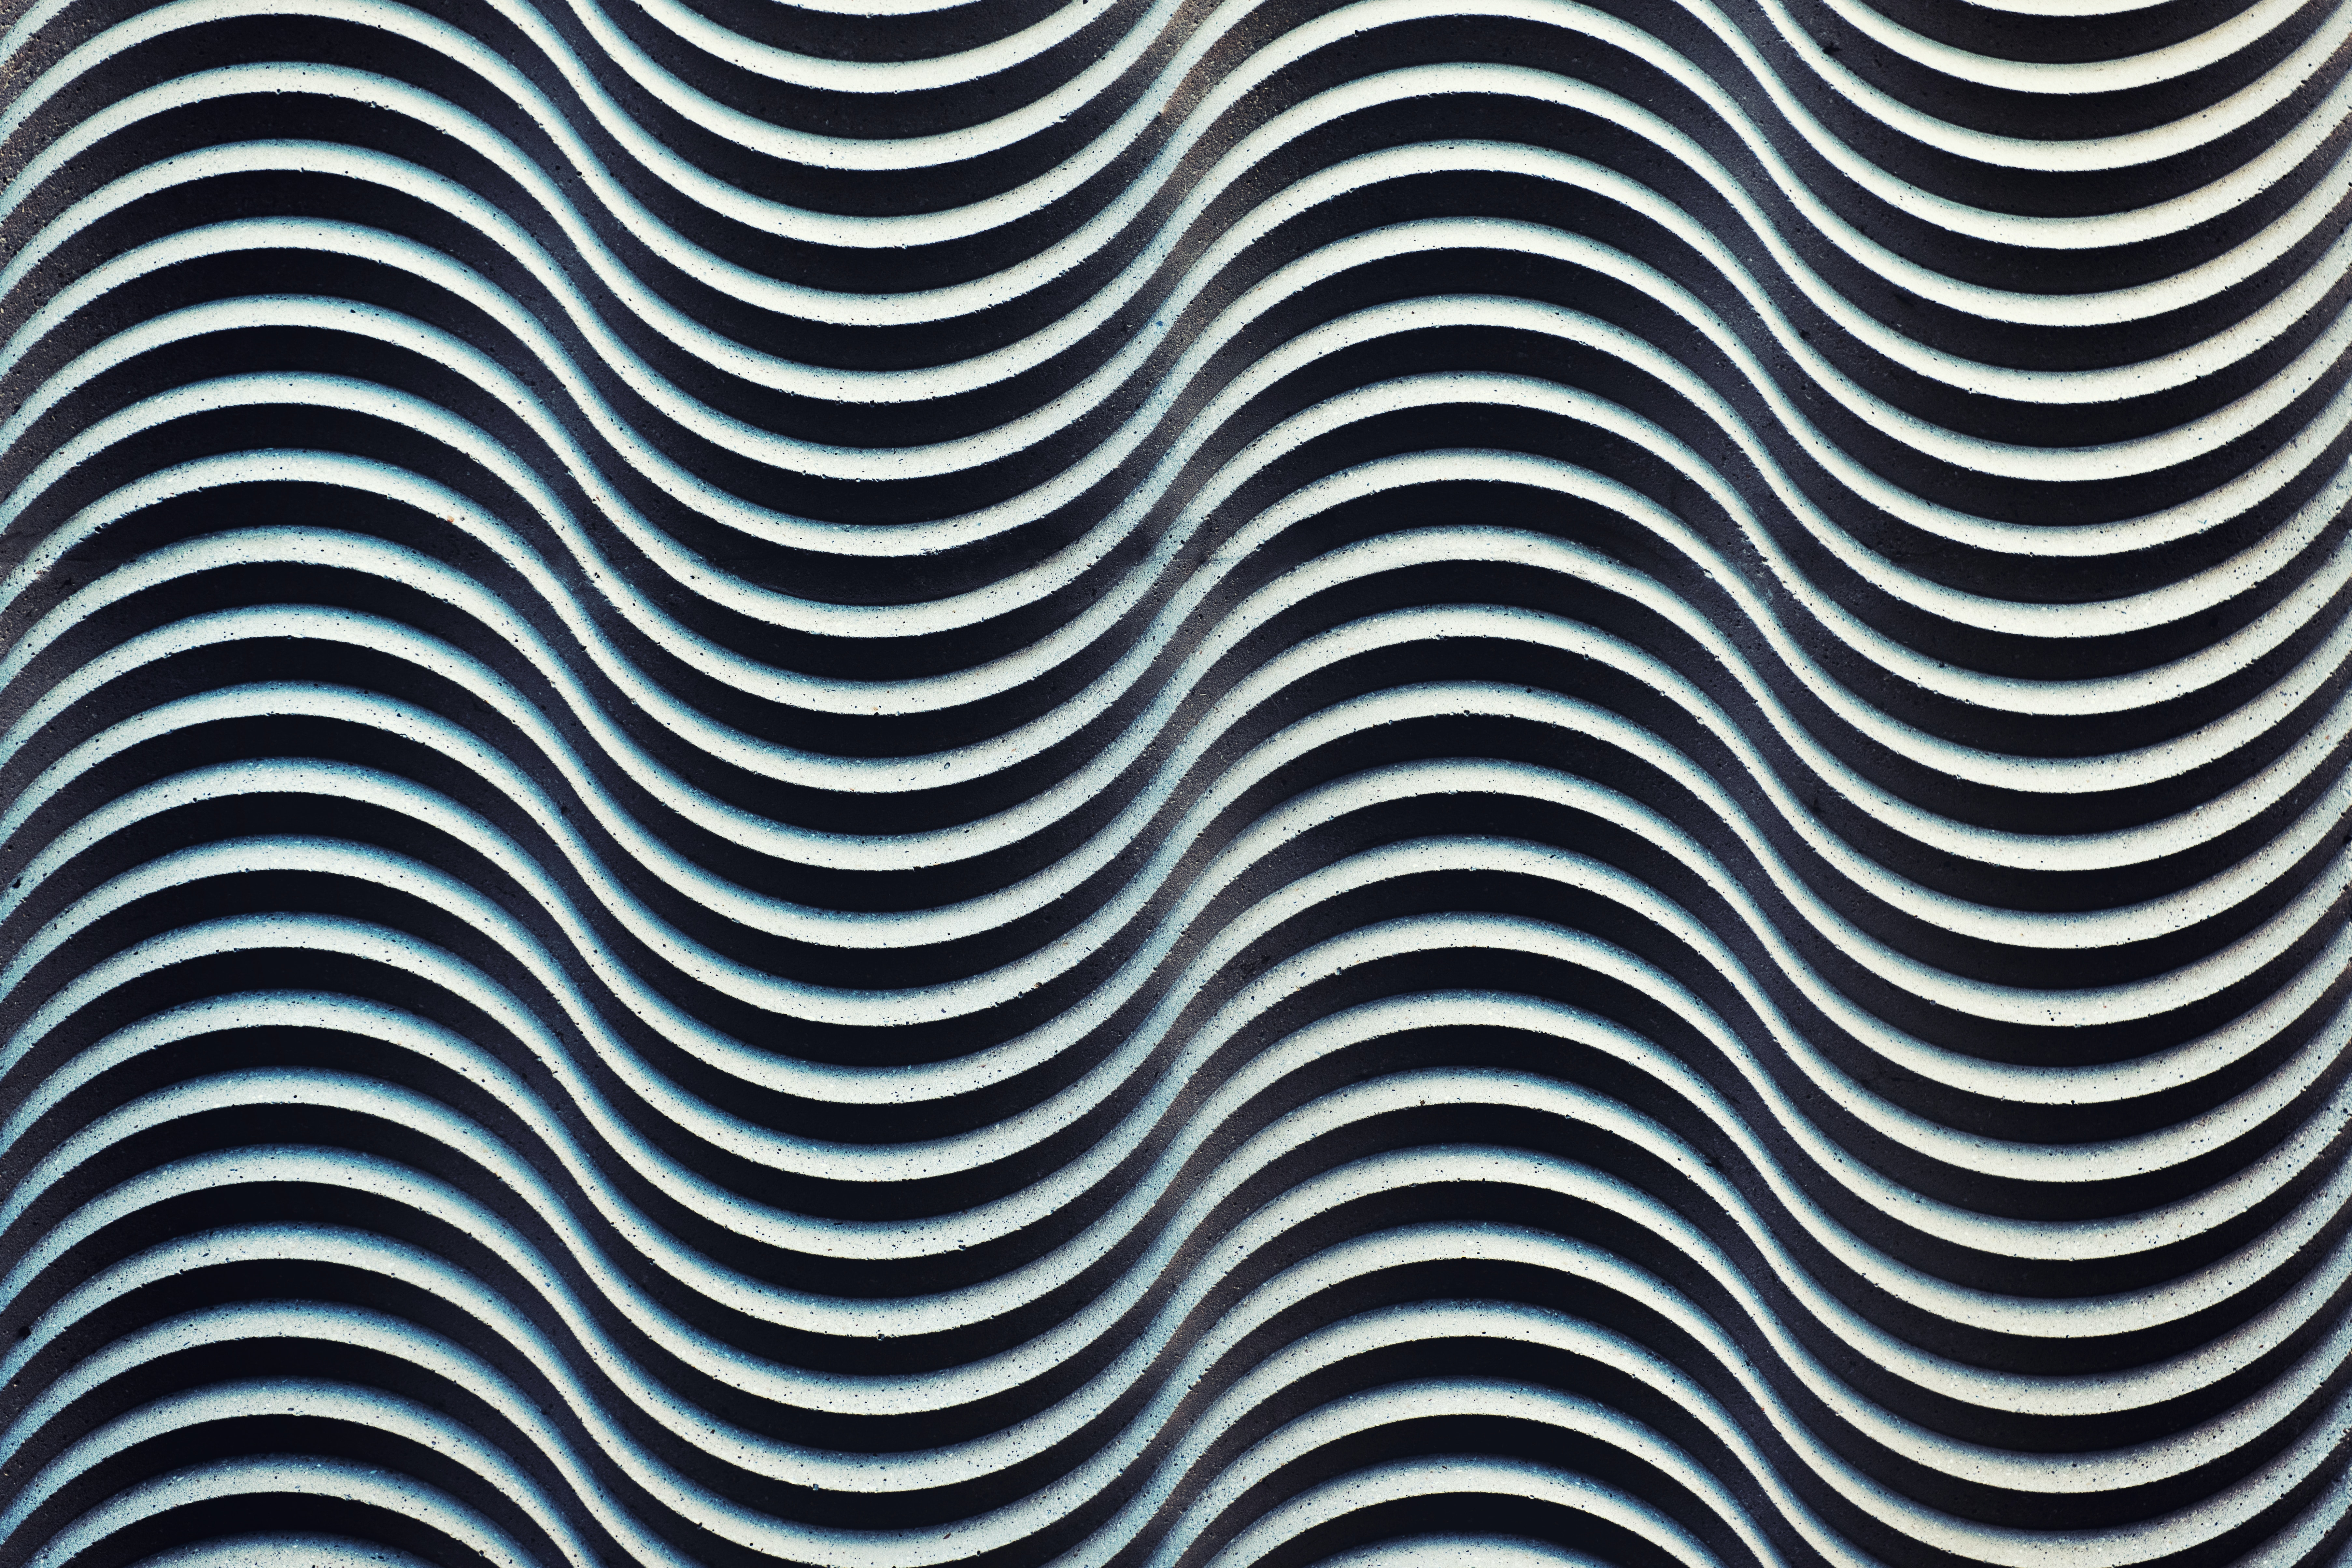 A black and white image of wavy lines close together